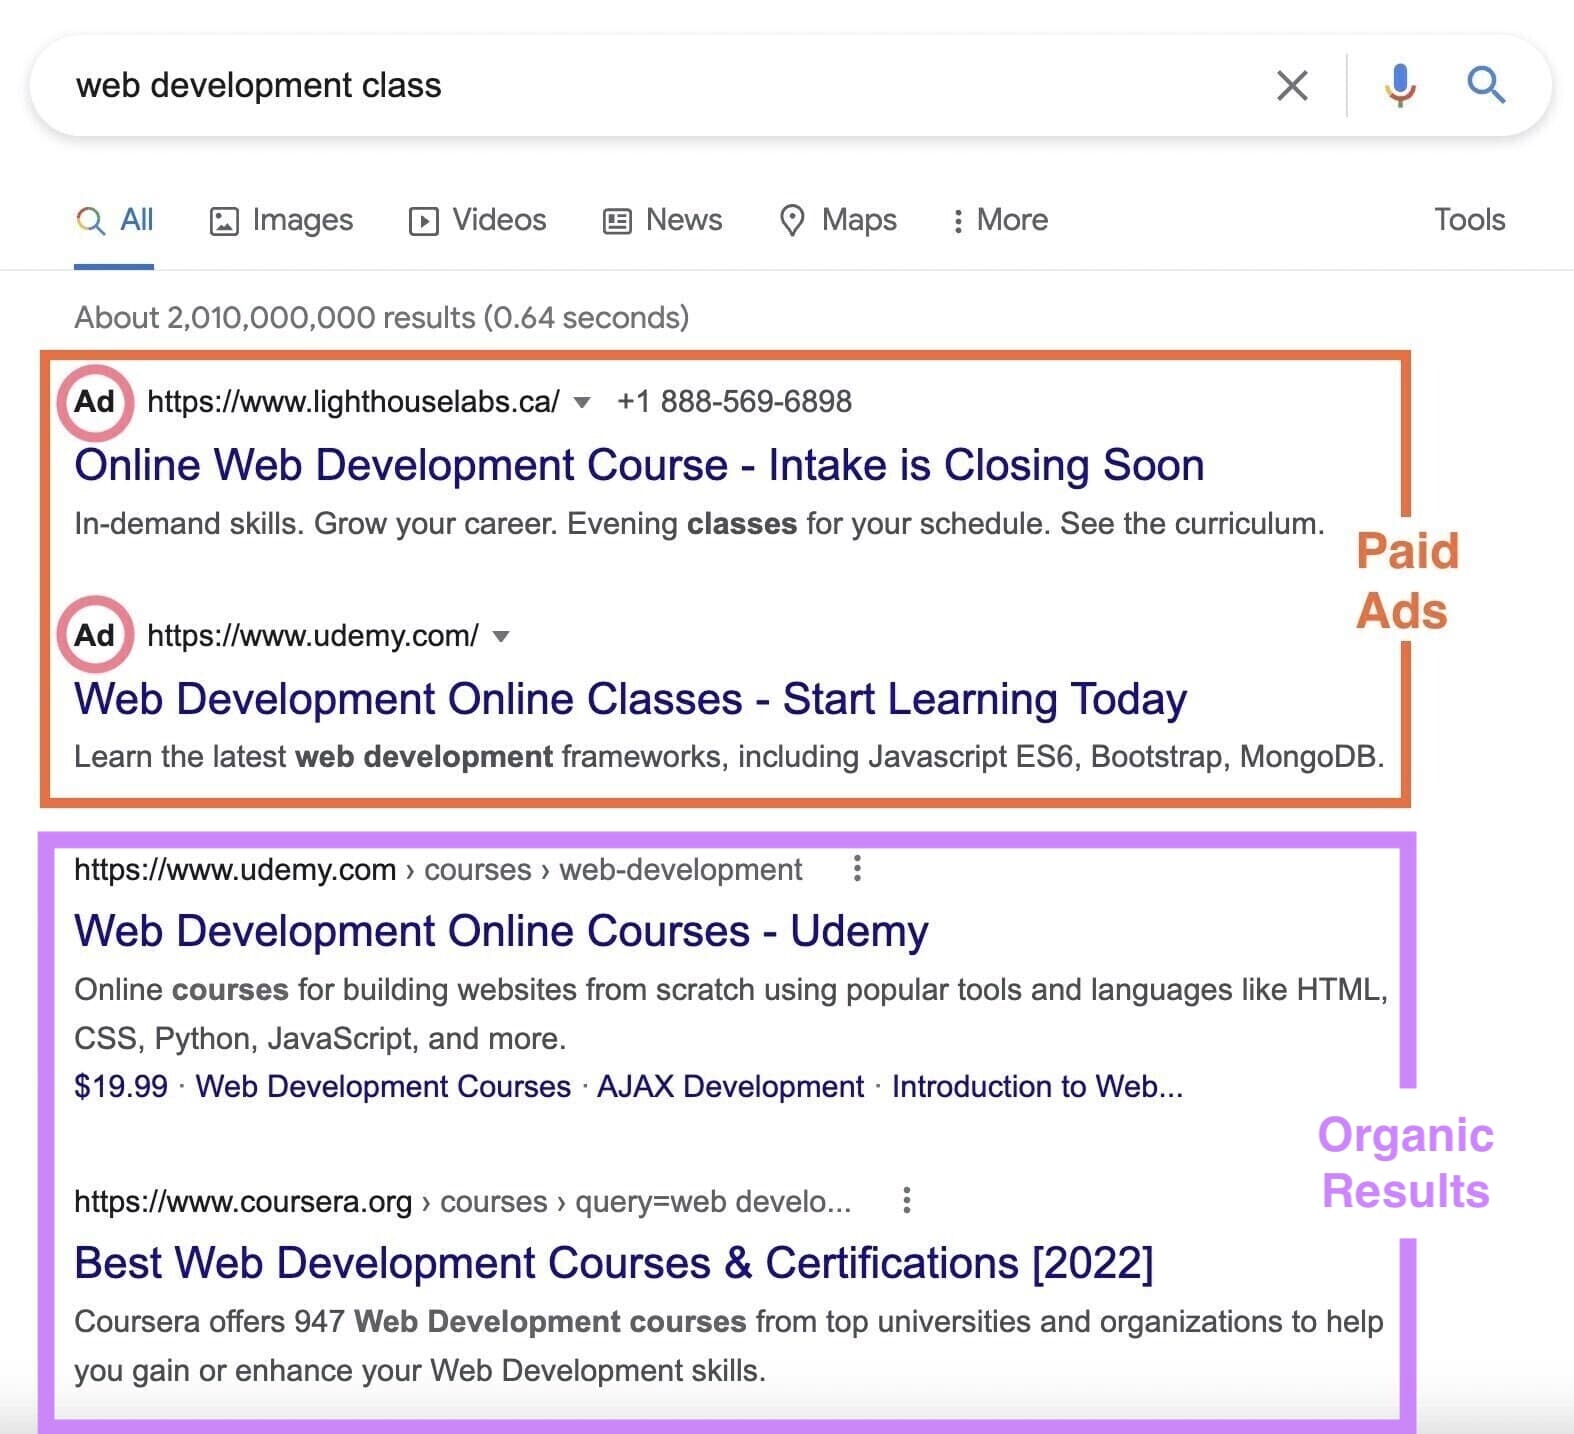 Lighthouse Labs and Udemy's search ads for the term “web development class"